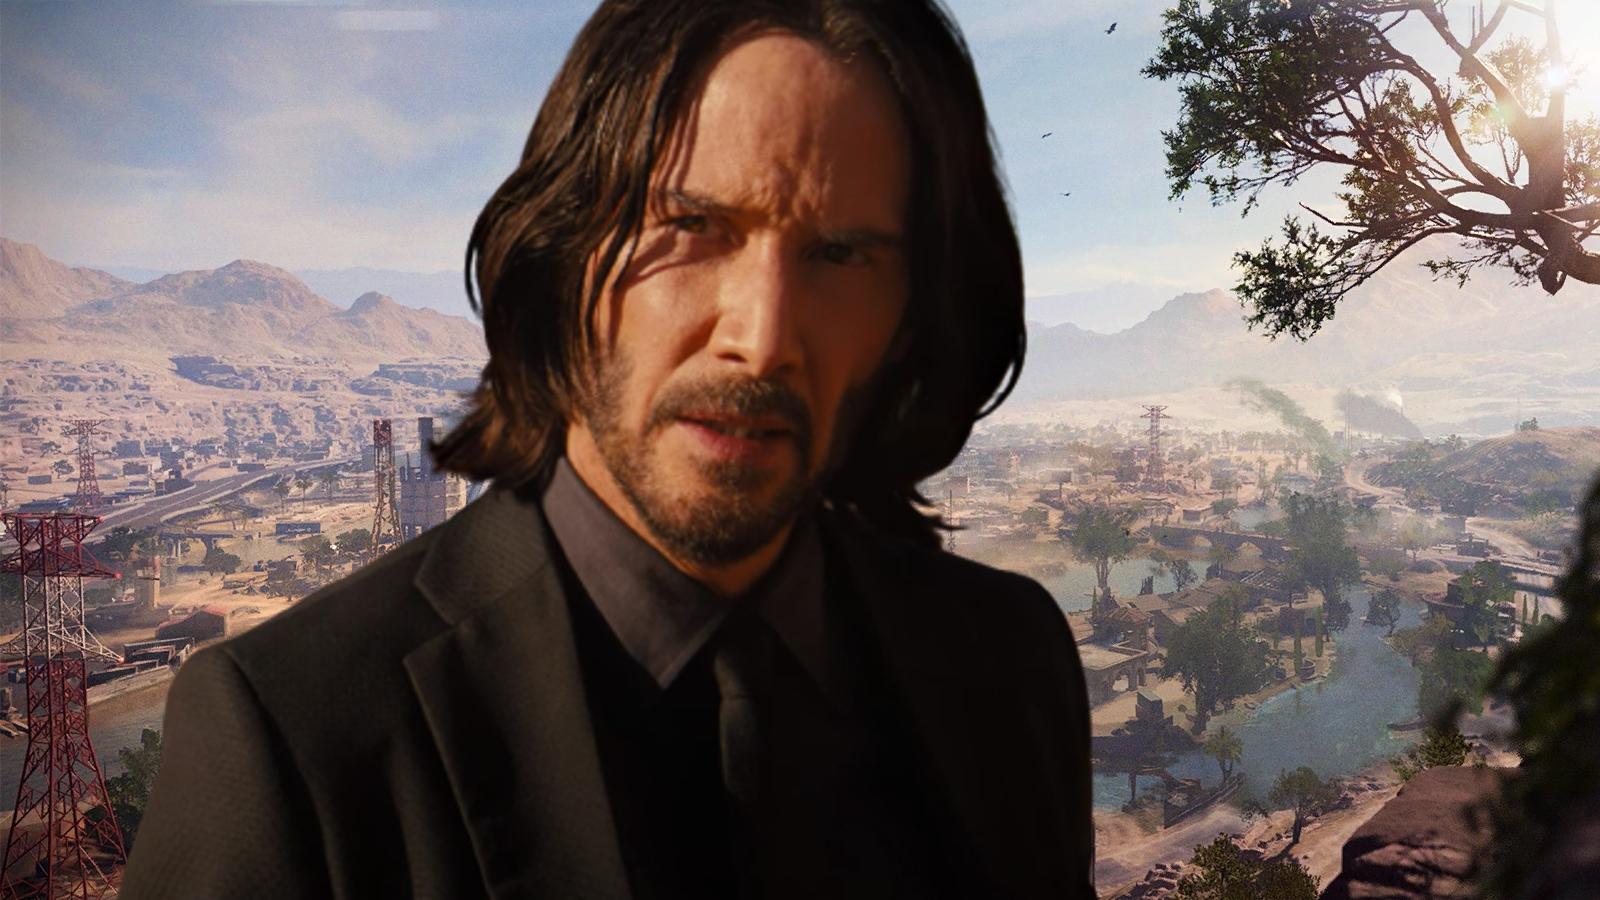 John Wick is at the top of the list of characters that Warzone 2 fans want added in the game.